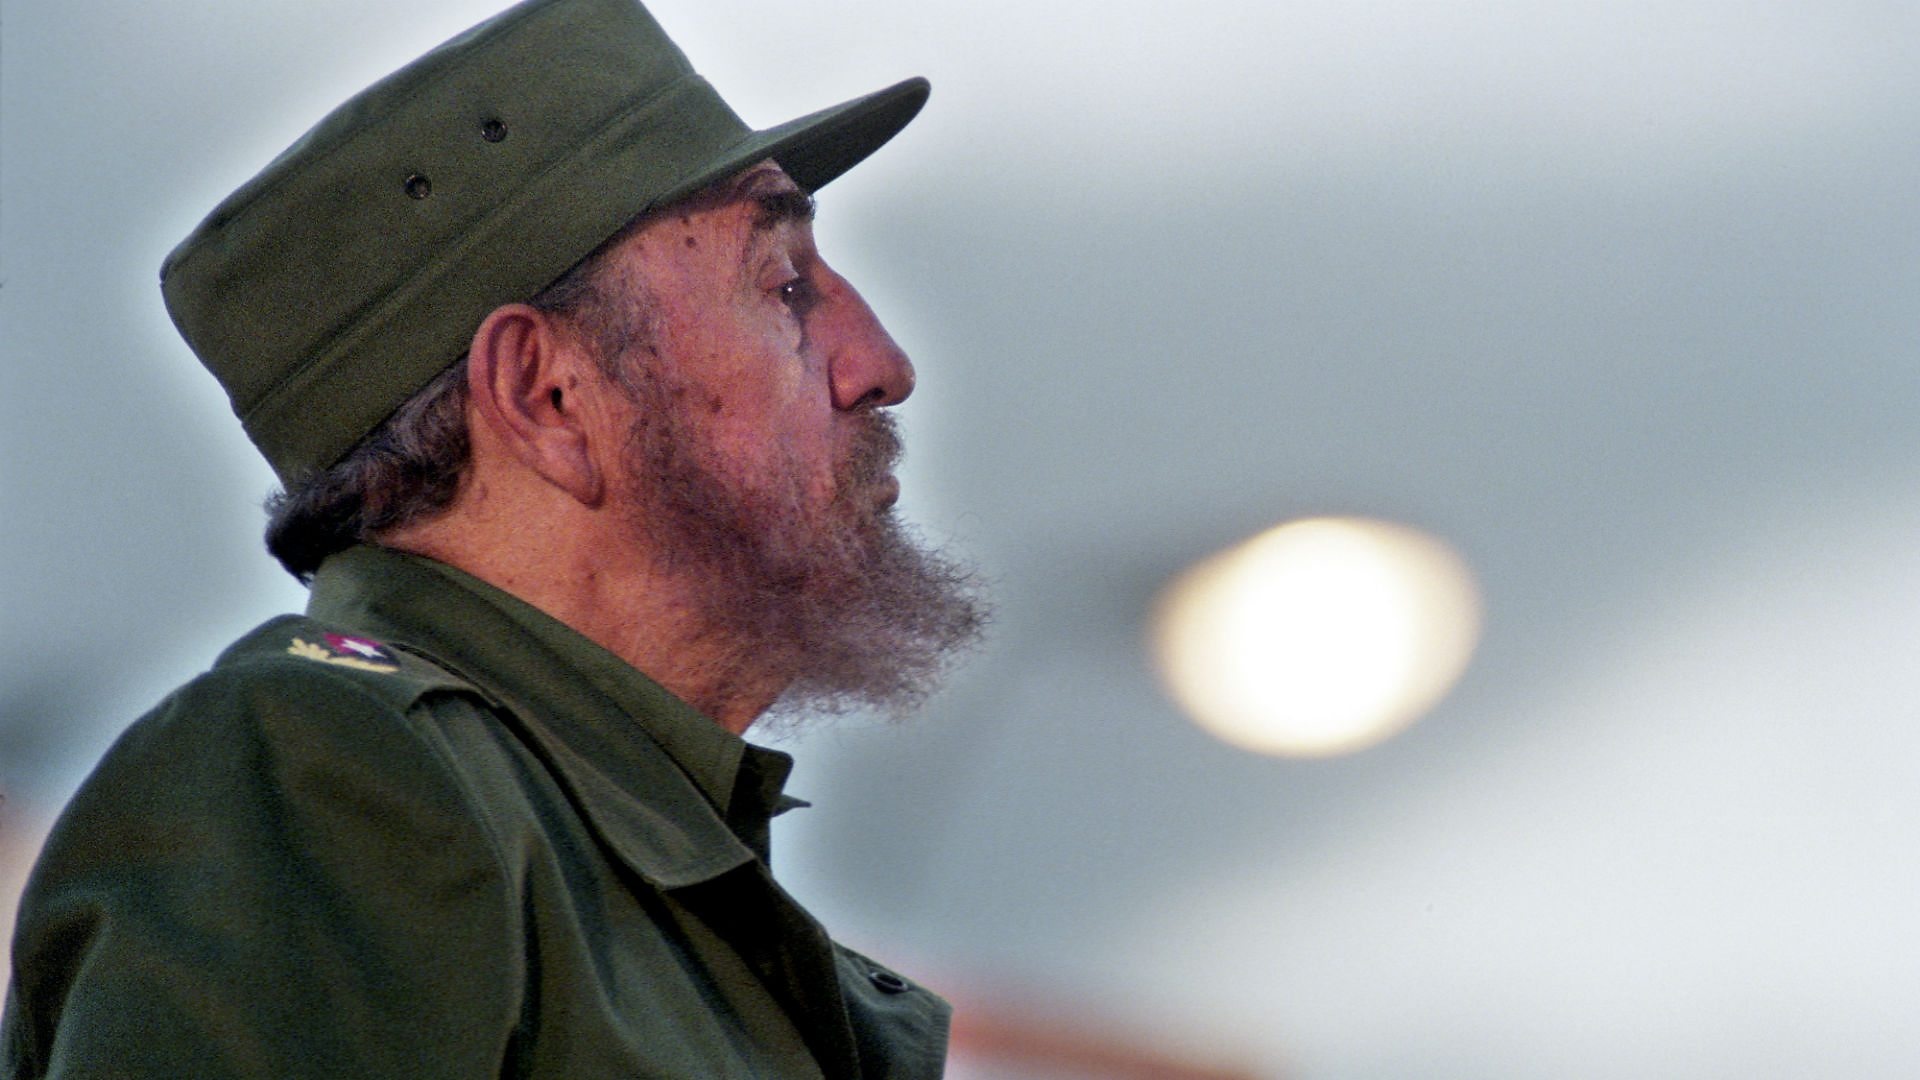 Fidel Castro: Professed to be Marxist after assuming leadership of Cuba. 1920x1080 Full HD Background.